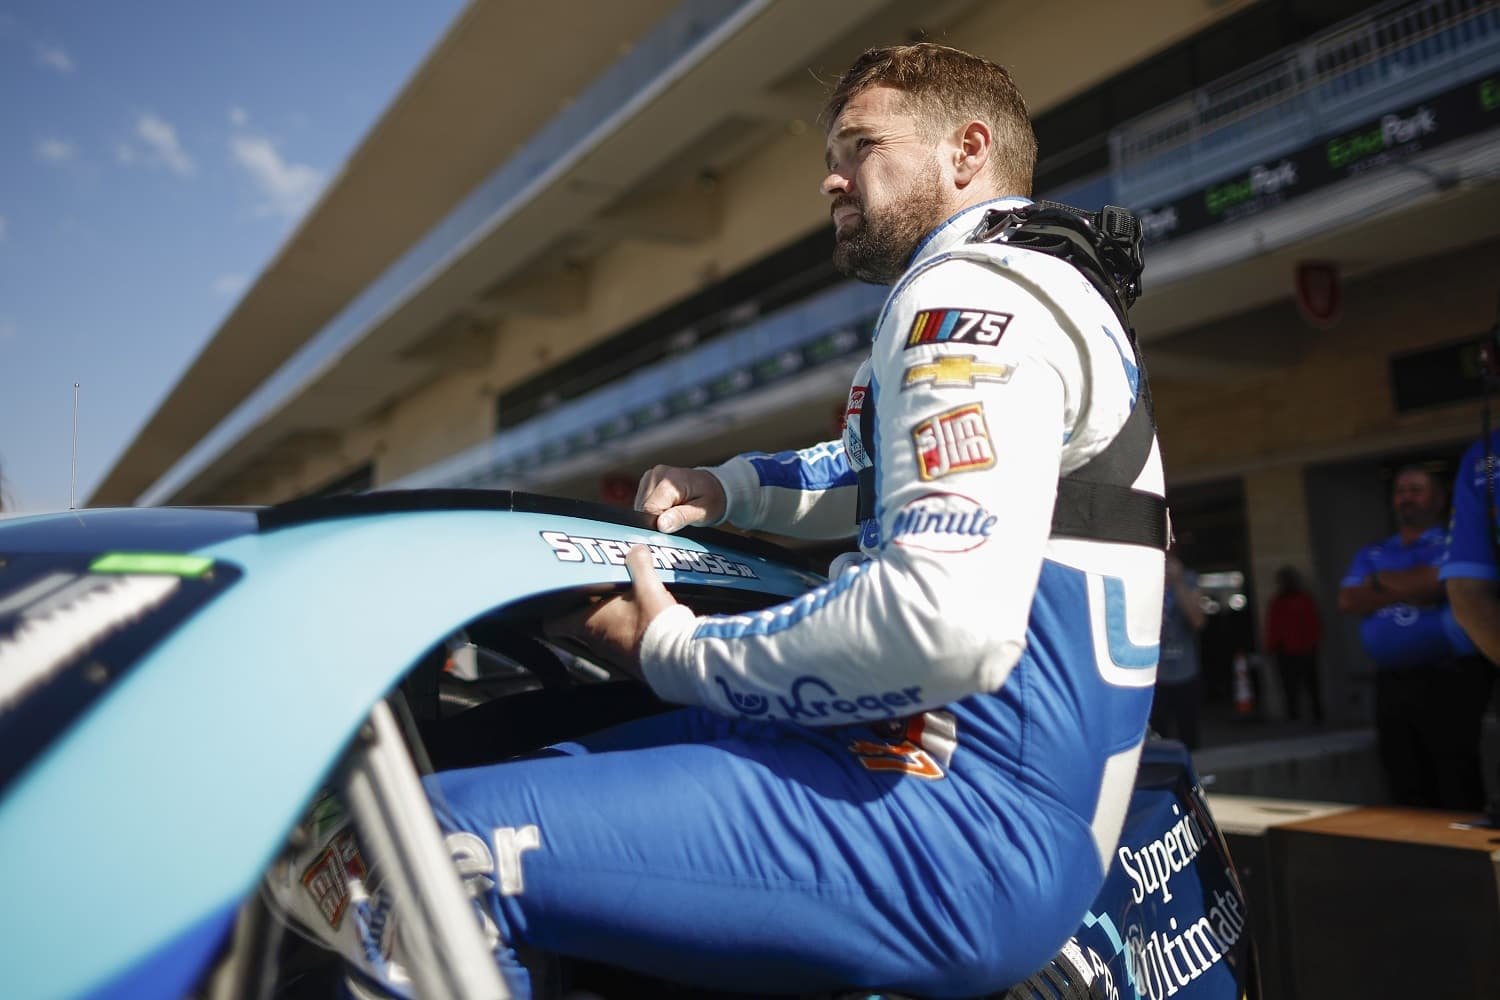 Ricky Stenhouse Jr. enters his car in the garage area during qualifying for the NASCAR Cup Series EchoPark Automotive Grand Prix at Circuit of The Americas on March 25, 2023. | Chris Graythen/Getty Images